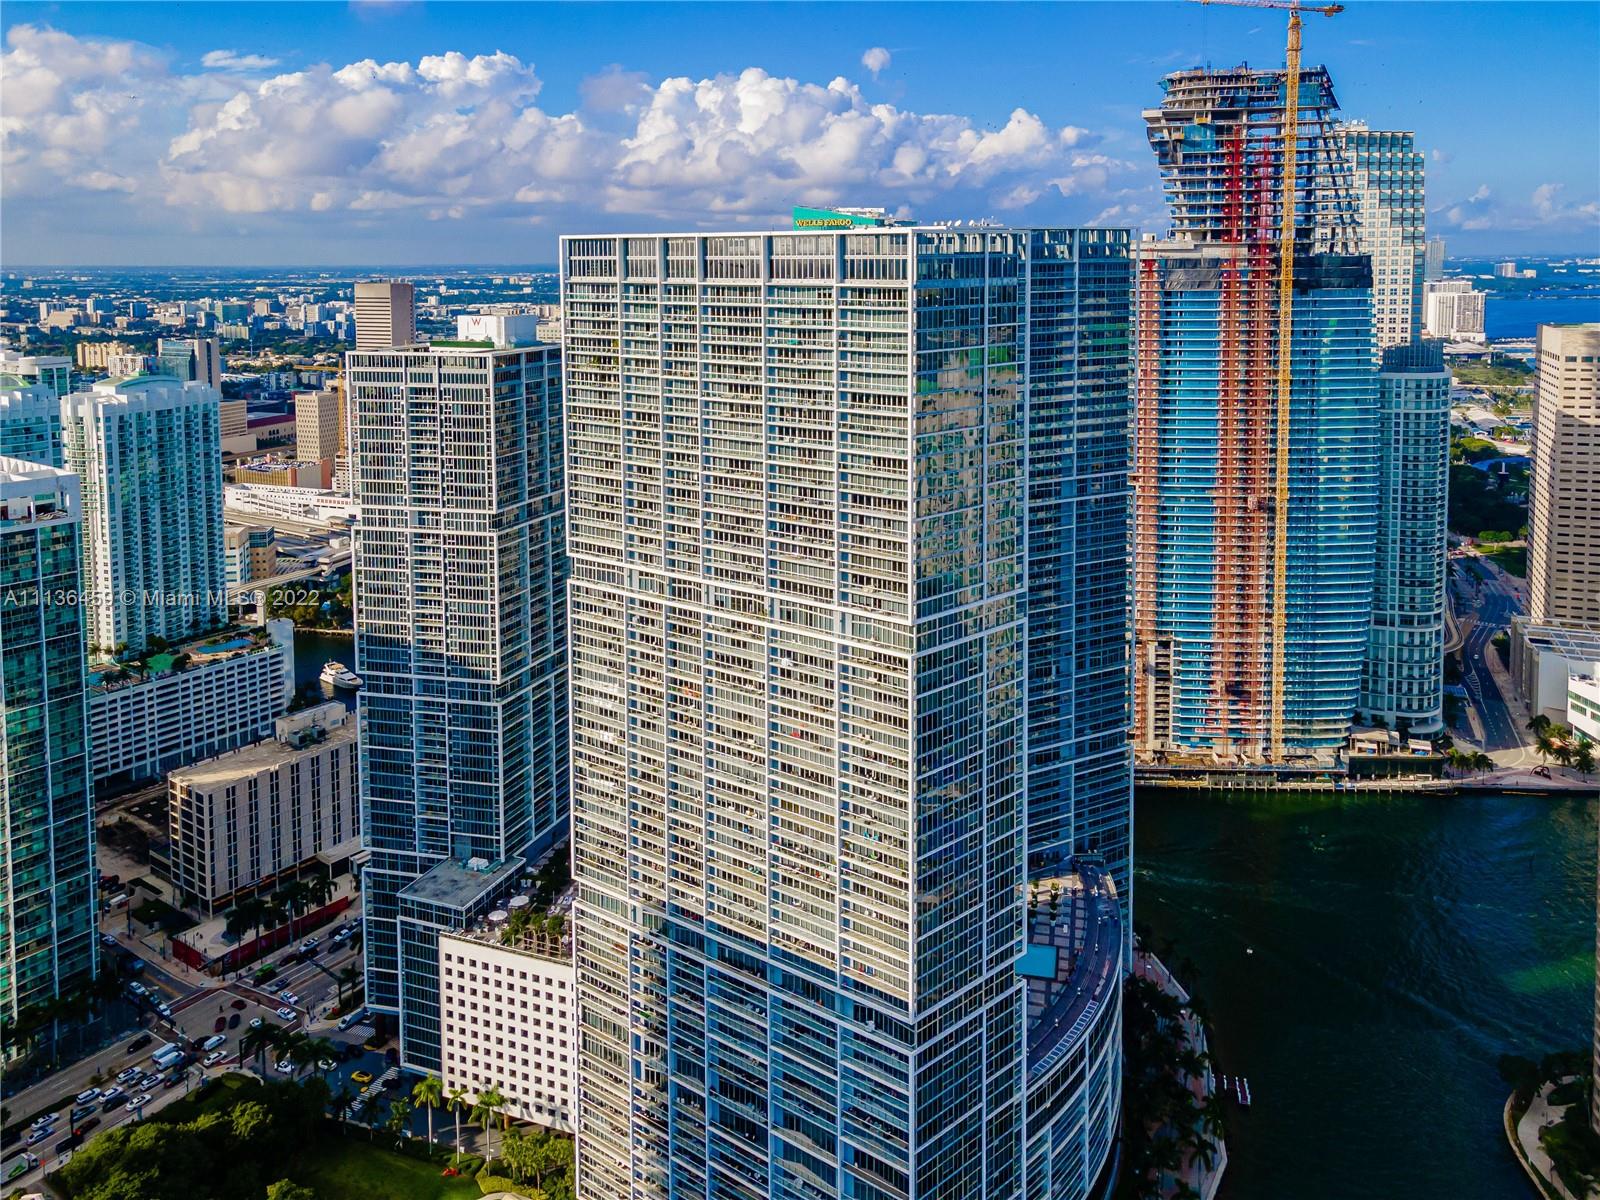 *Investors only*Live at the iconic Icon Brickell in this spacious 2 bedroom, 2 bath plus Den apartment located on the 20th floor with the best views Brickell has to offer including the Ocean, Miami-Beach, Fisher Island, Key Biscayne, and more. The unit offers a spacious 1,290sf split-floorplan, with access to the balcony from every room. Live in the heart of Brickell with close proximity to endless choices of top restaurants, bars, and Brickell City Center.